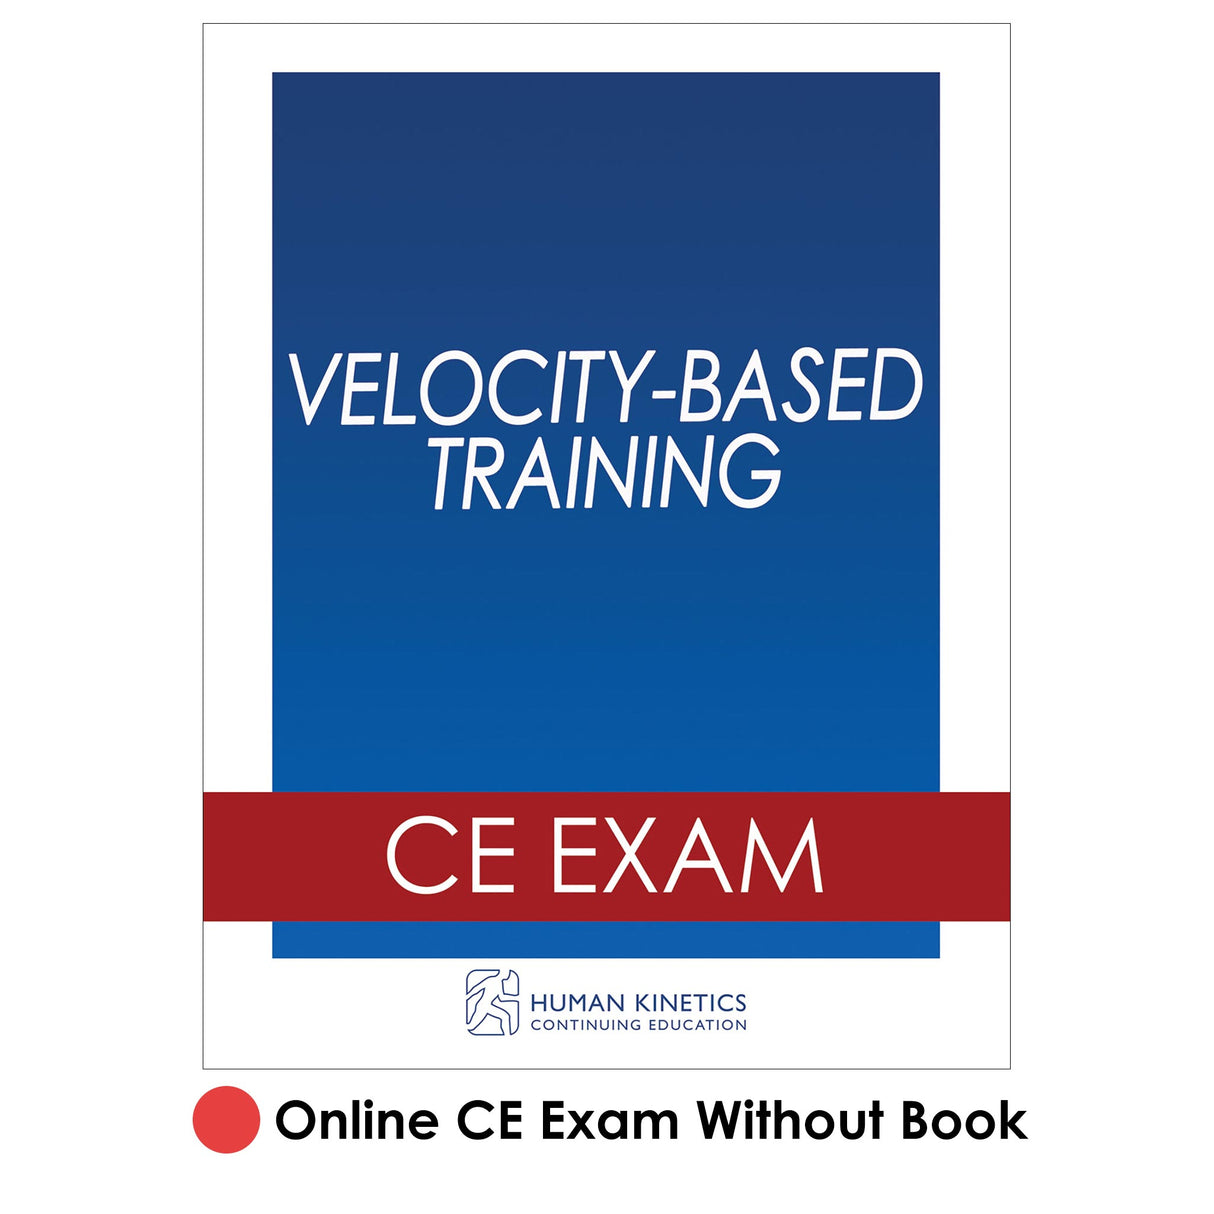 Velocity-Based Training Online CE Exam Without Book